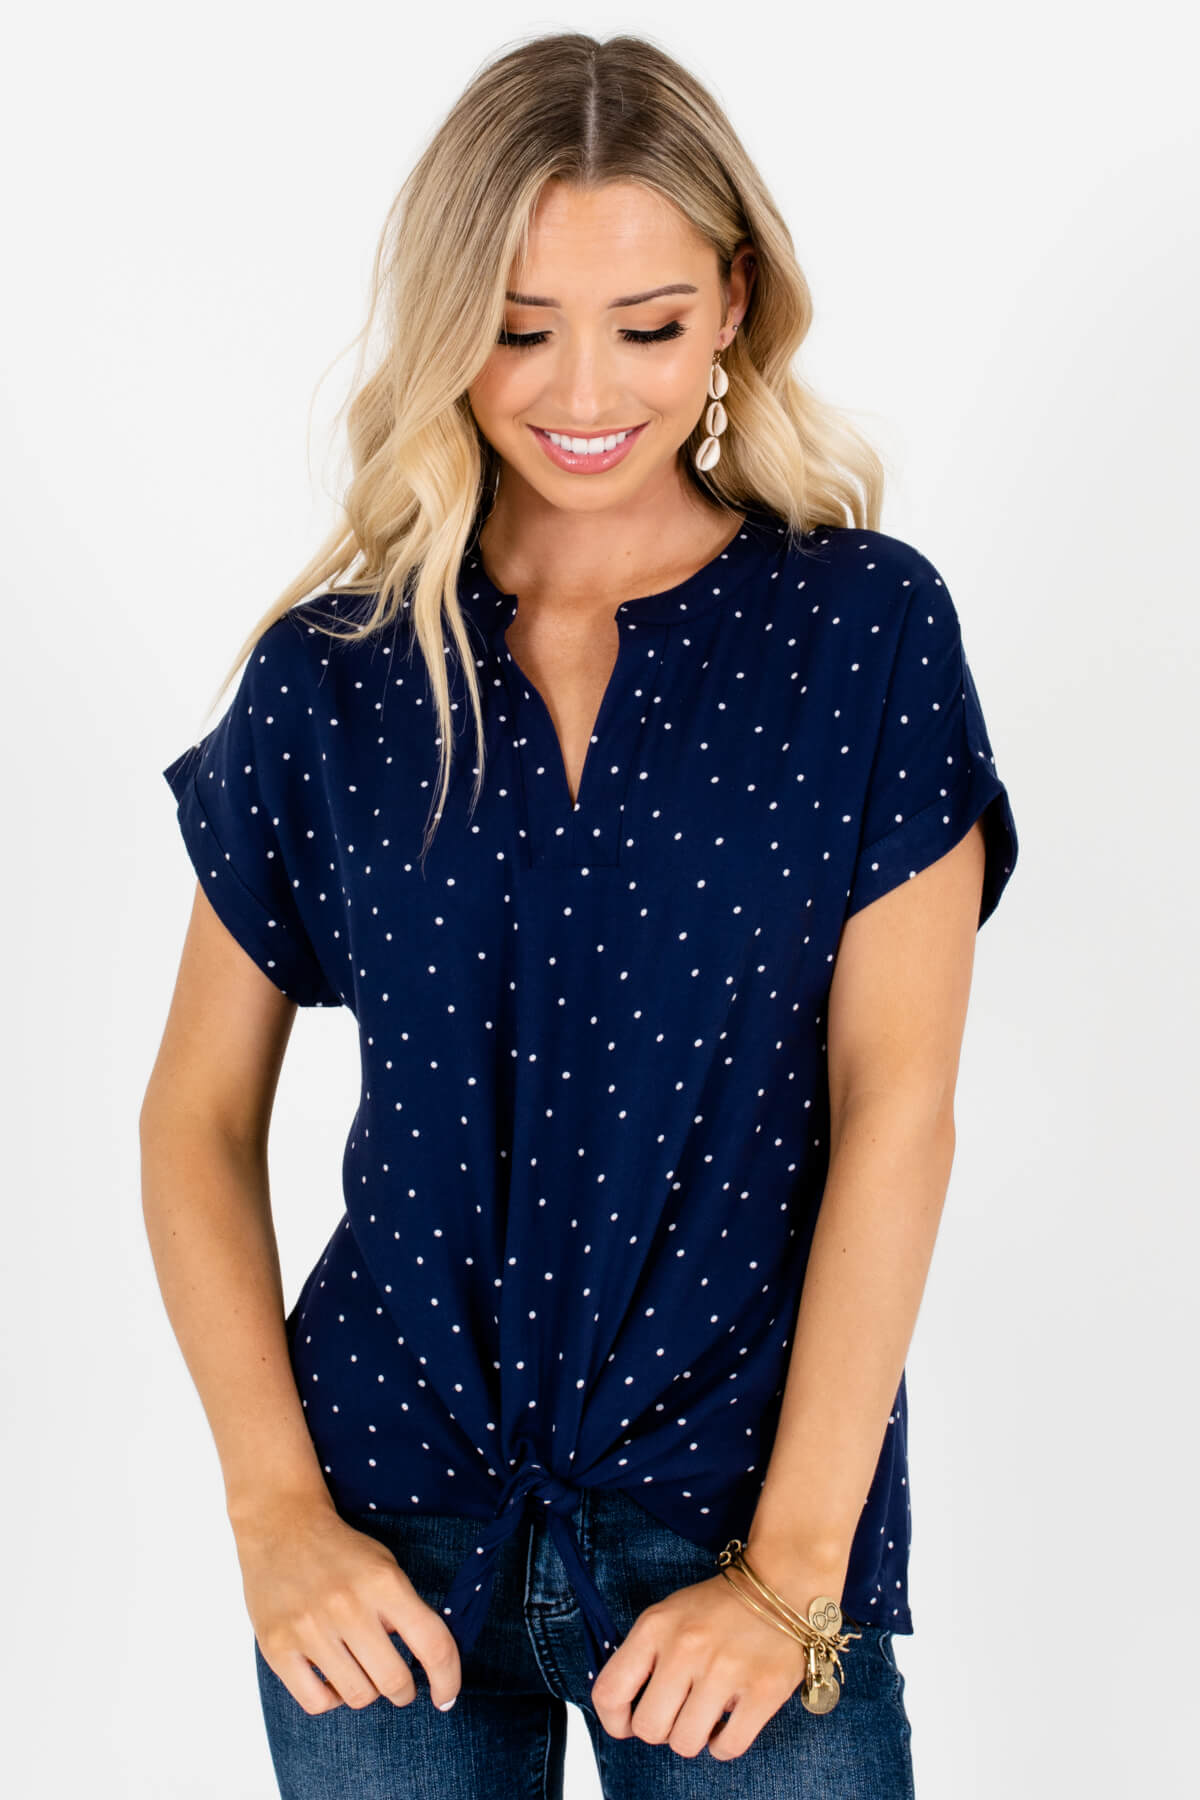 Women's Loose Casual Short Sleeve Top Navy Blue and White Polka Dots  T-Shirt Blouse(226ya7a)